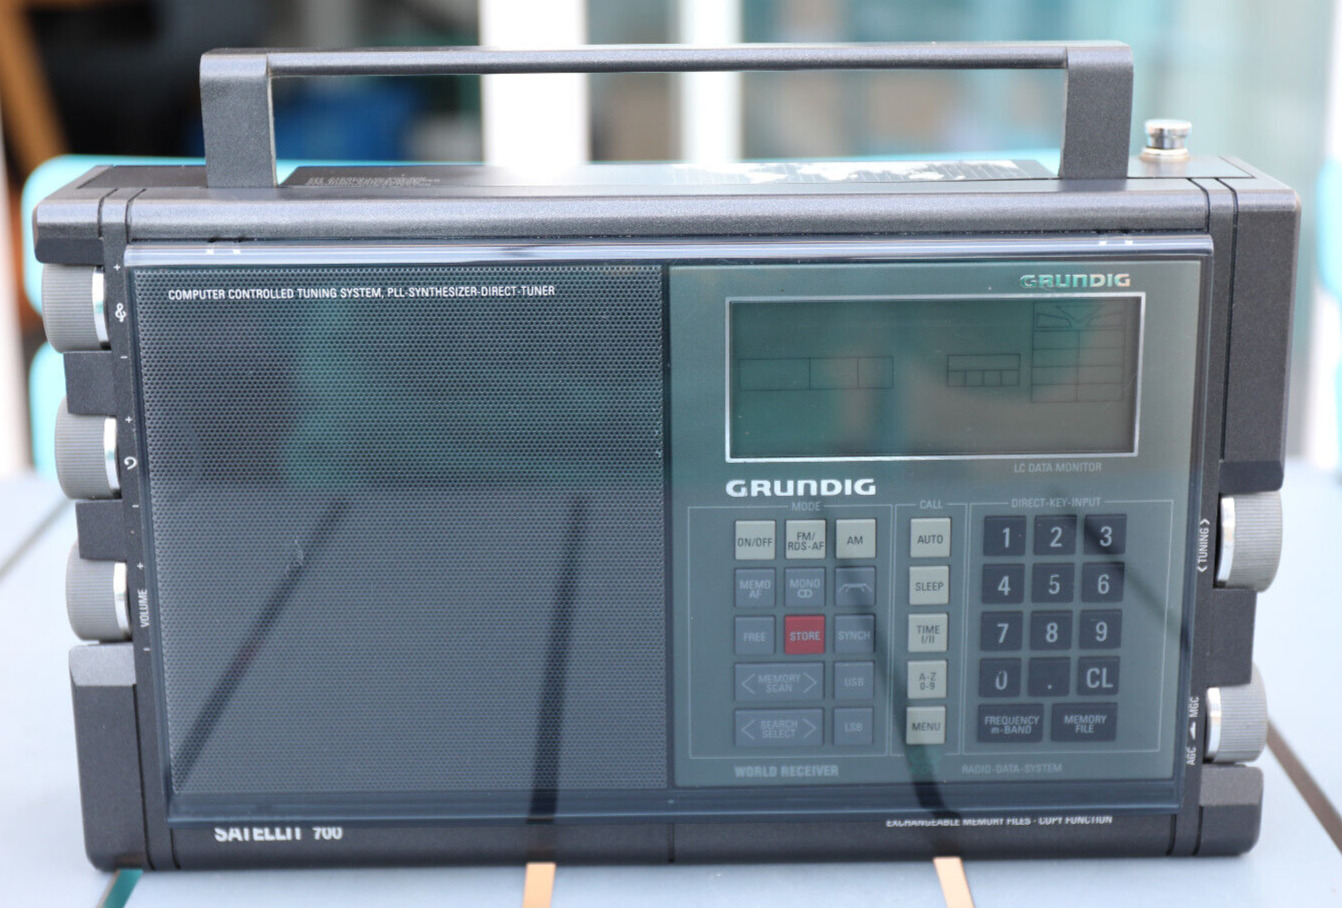 Grundig Satellite 700 Computer Controlled Tuning System Pll Synthesizer